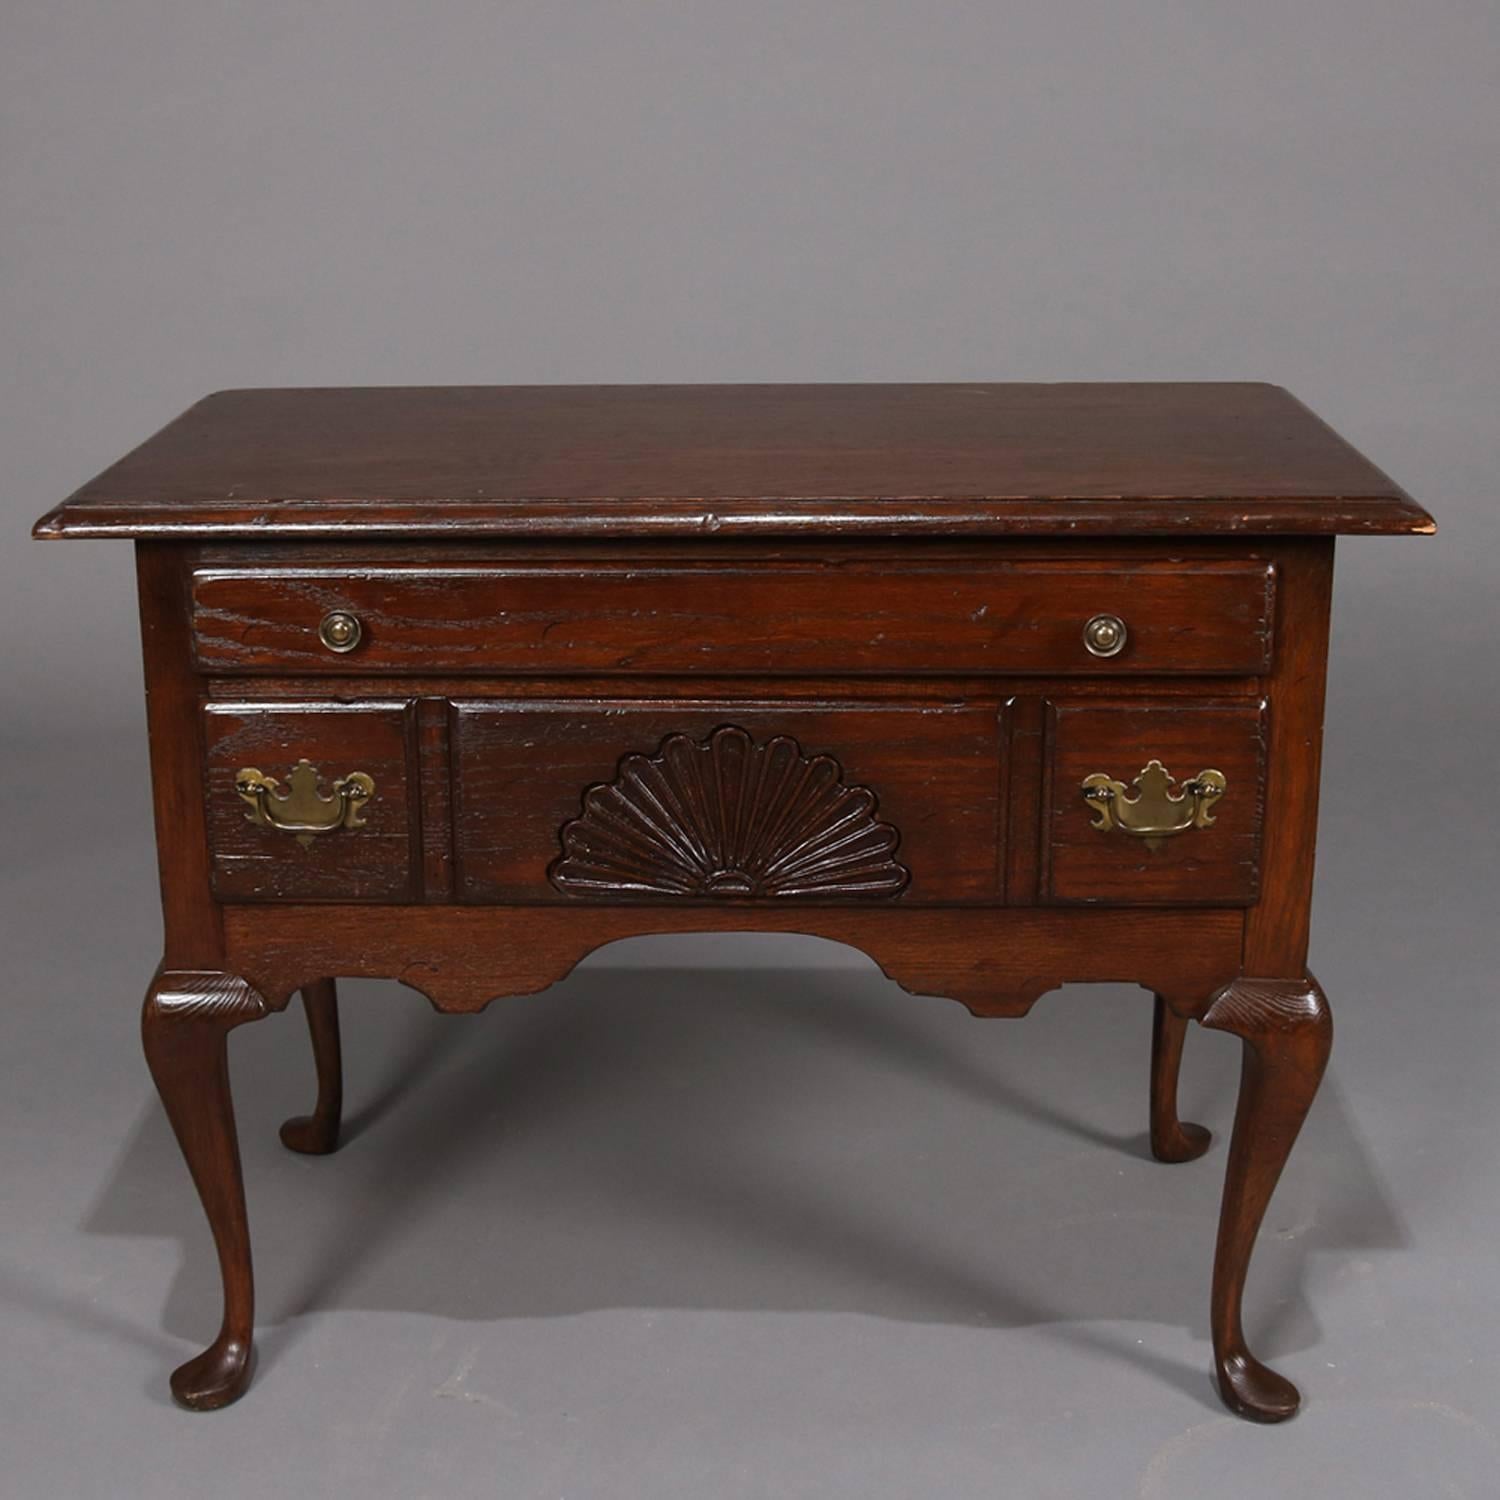 Antique English Queen Anne Baker School Cushman Classics lowboy by H.T. Cushman manufacturing company/general interiors, N. Bennington, VT features upper long drawer above smaller long drawer with central carved shell over scalloped skirt and seated